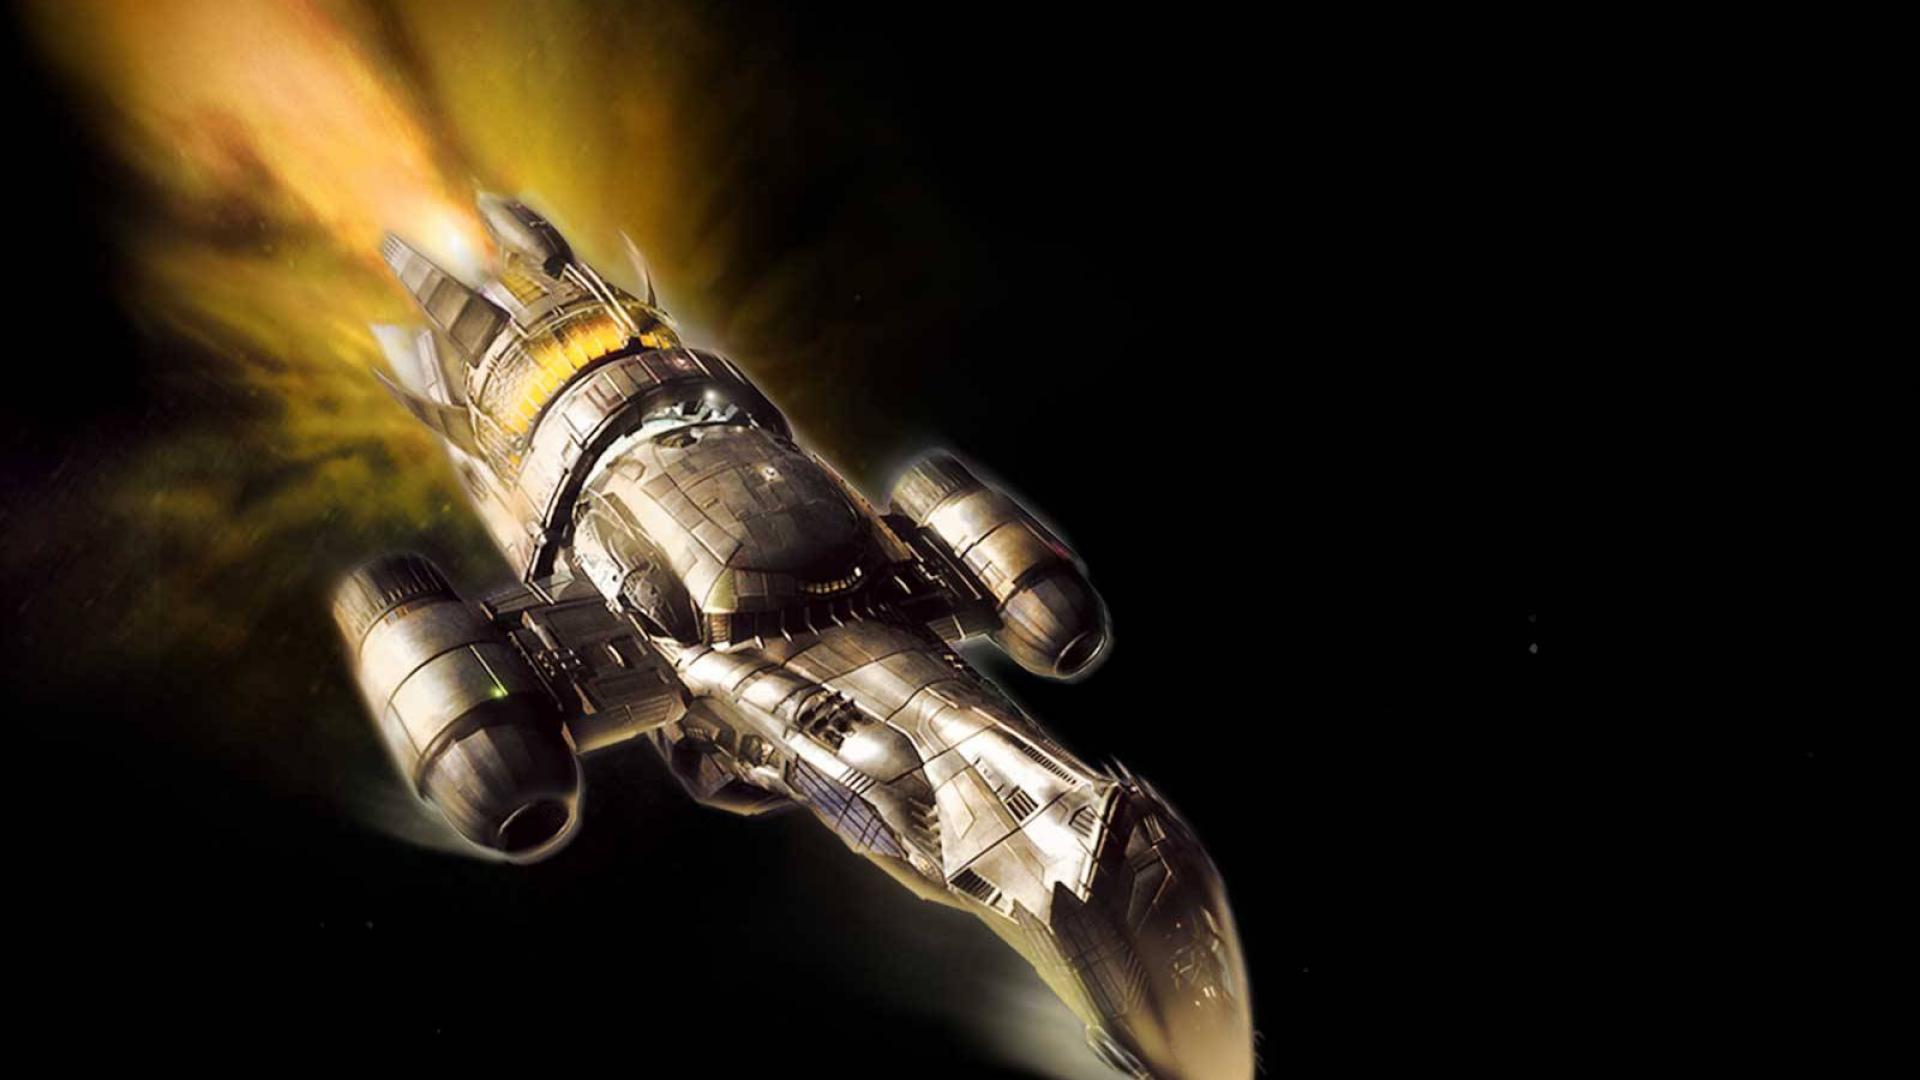 Firefly Wallpaper High Quality And Resolution